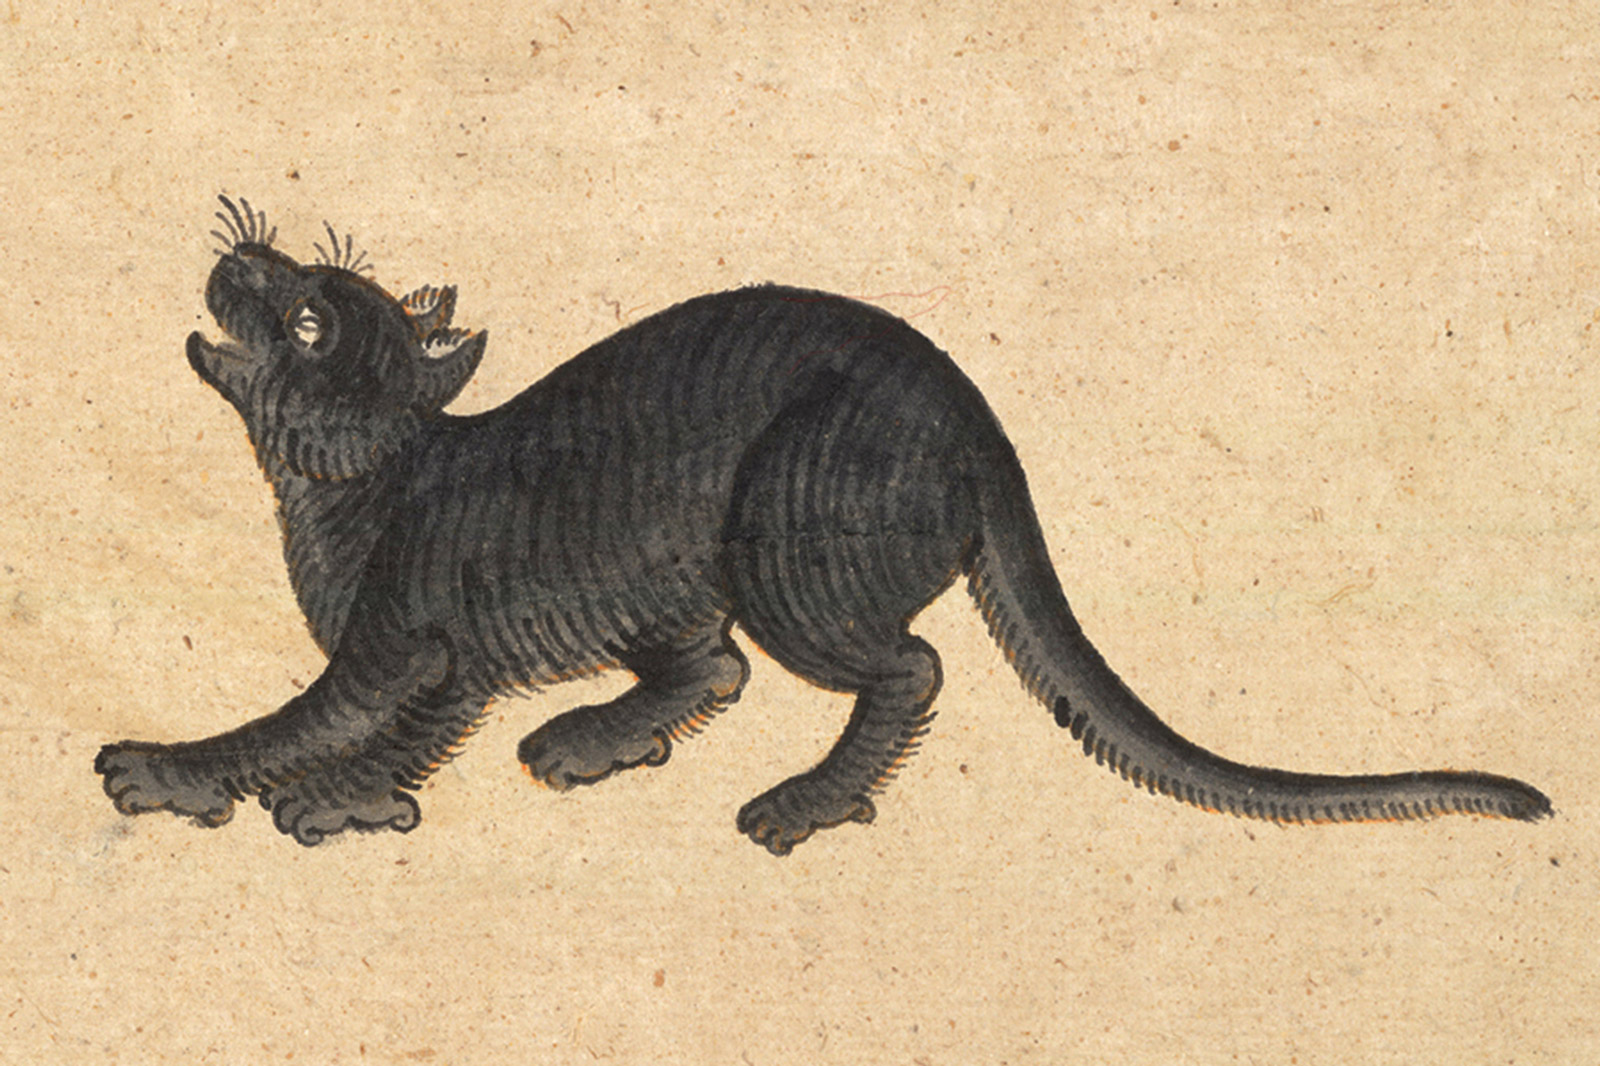 An illustration of a Ninlarat (Dark Sapphire) cat from a mid-nineteenth-century manuscript titled “Tamra Maew.” The accompanying caption reads : “As the name, the breed. Dark Sapphire,
Perfect shiny black form,
Teeth, eyes, claws, tongue, black as the body,
And a tapering tail to the end, running back to touch the head.”